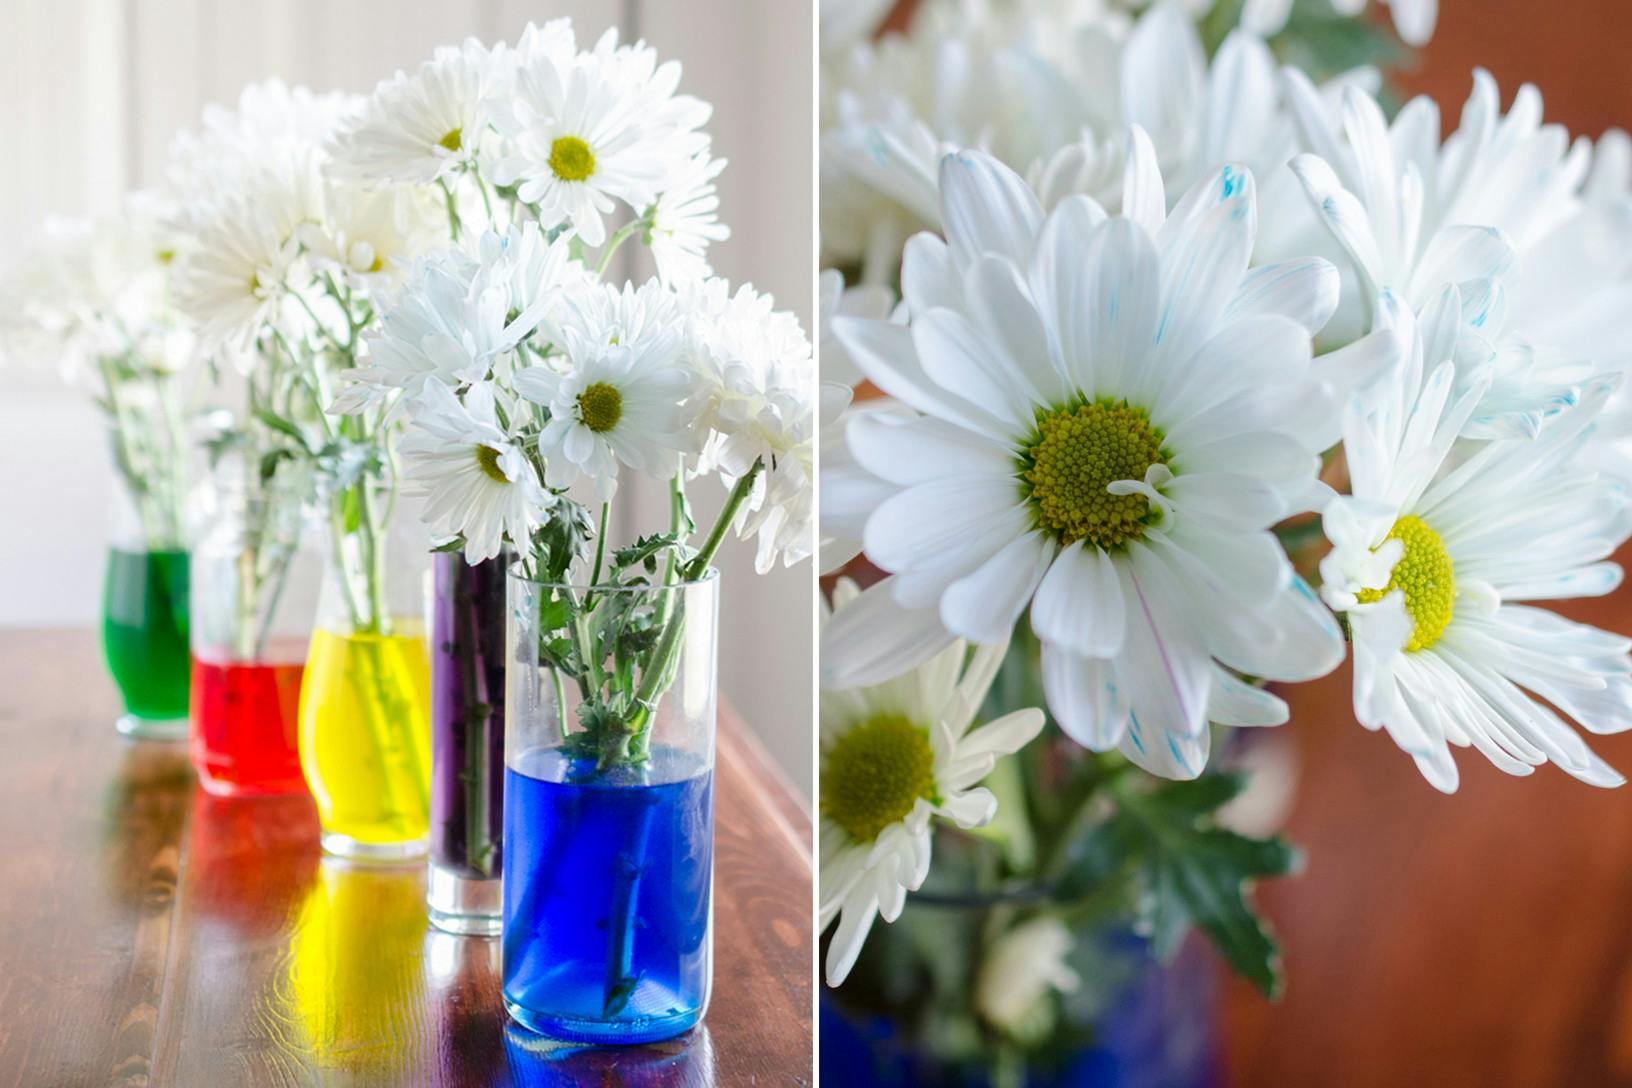 Use food coloring and white flowers for a fun centerpiece and springtime "science" experiment.